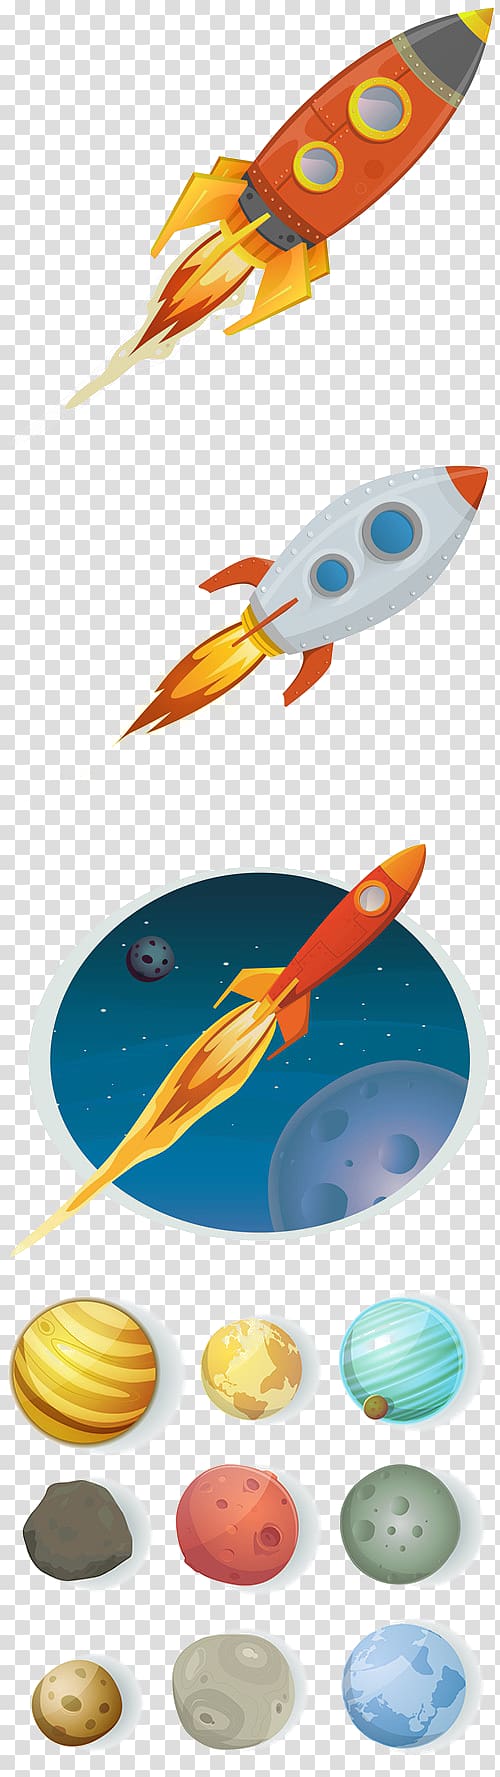 Airplane Rocket-powered aircraft, Hand-painted rocket transparent background PNG clipart